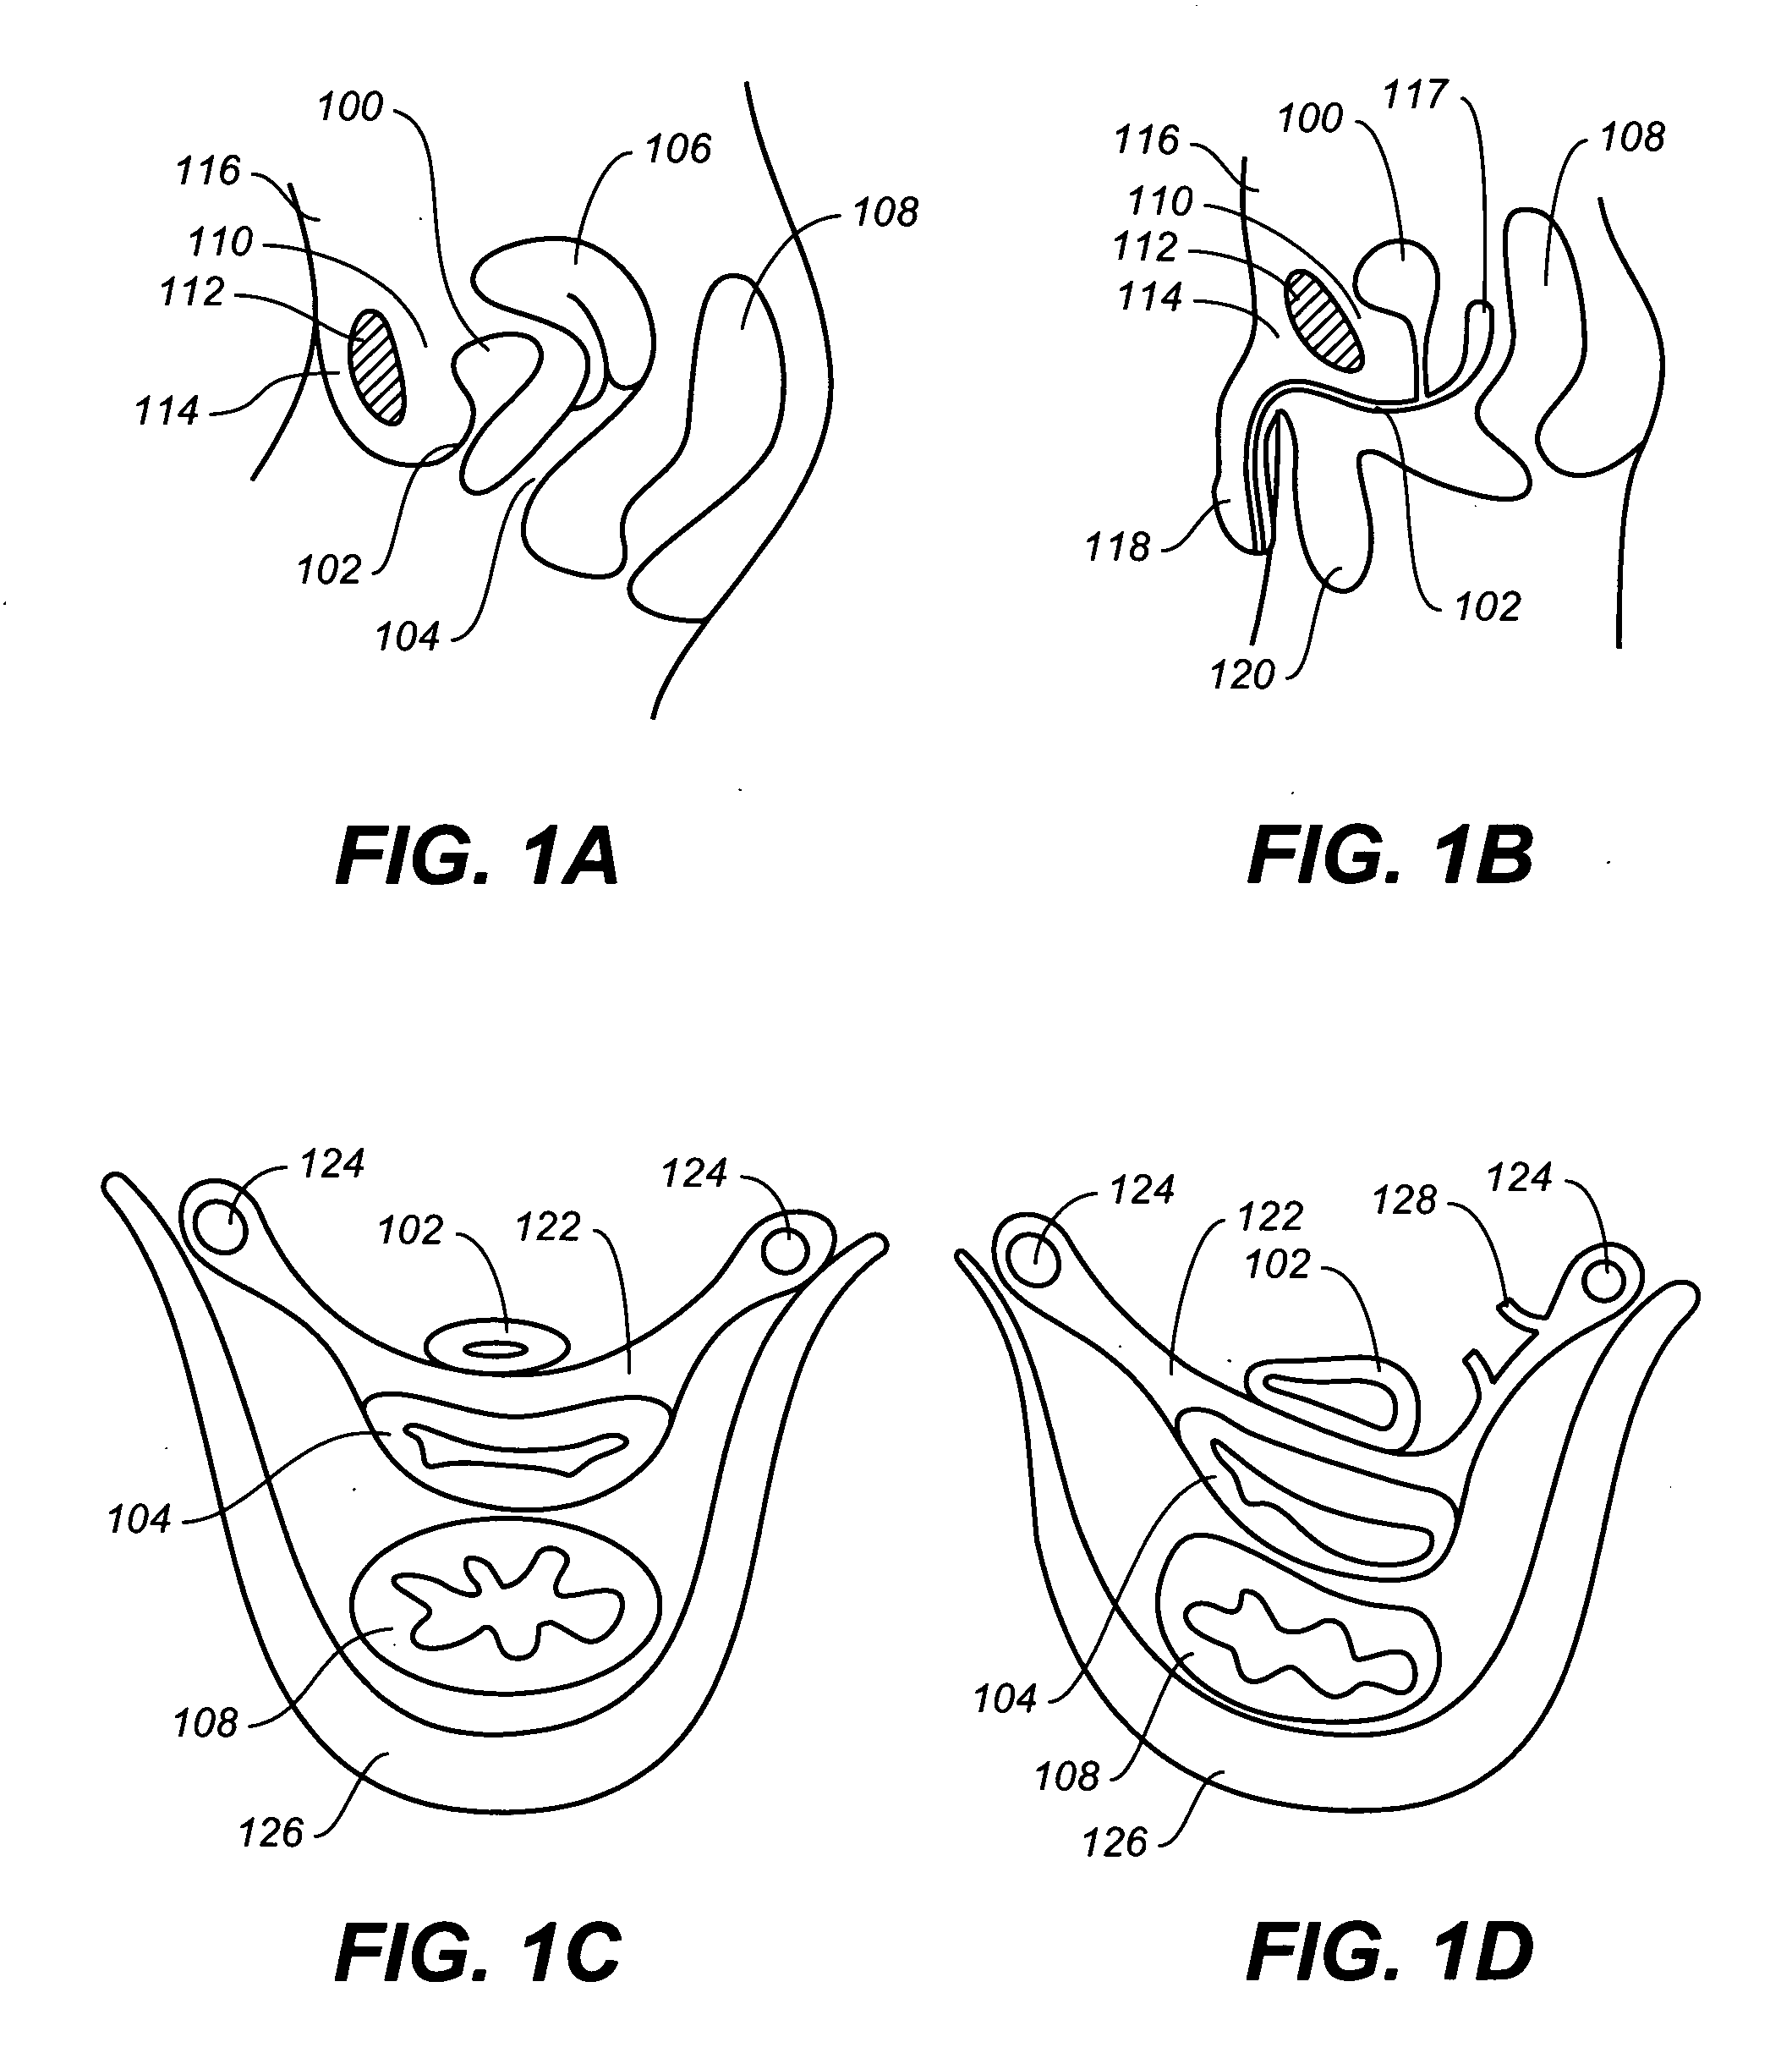 Dynamic and adjustable support devices